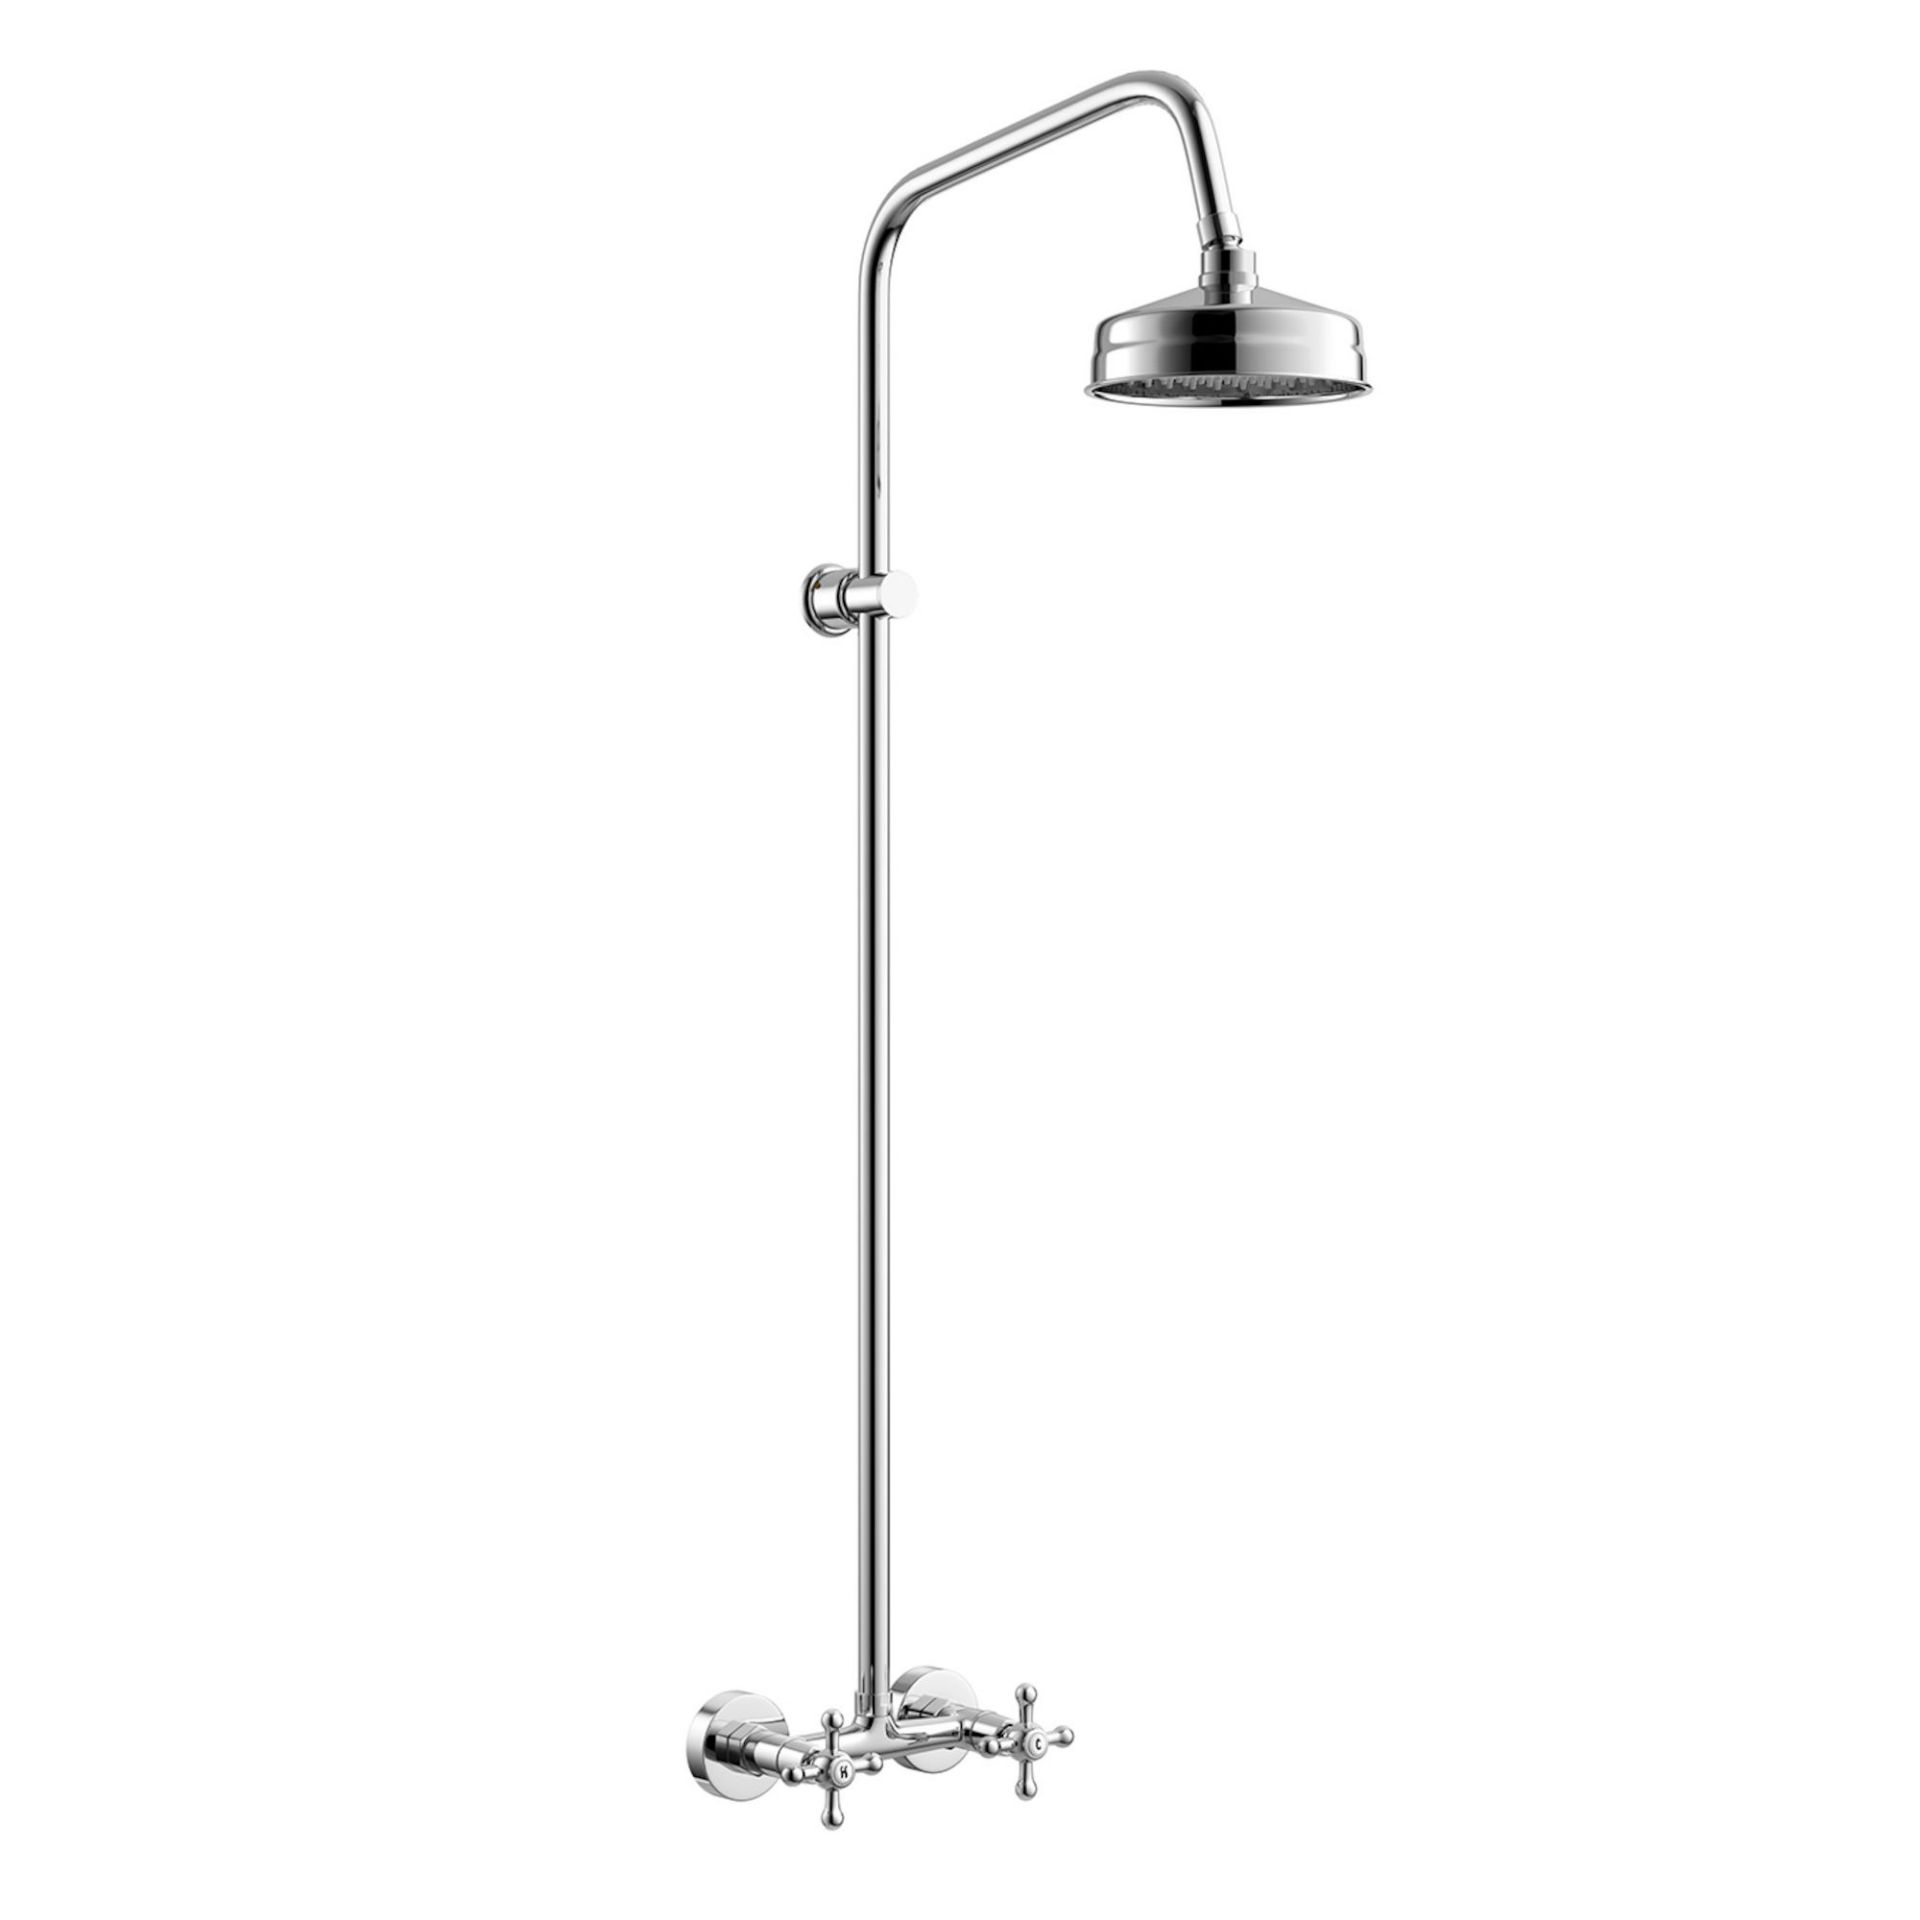 (CT193) Traditional Exposed Shower & Medium Head Exposed design makes for a statement piece Stunning - Bild 2 aus 3